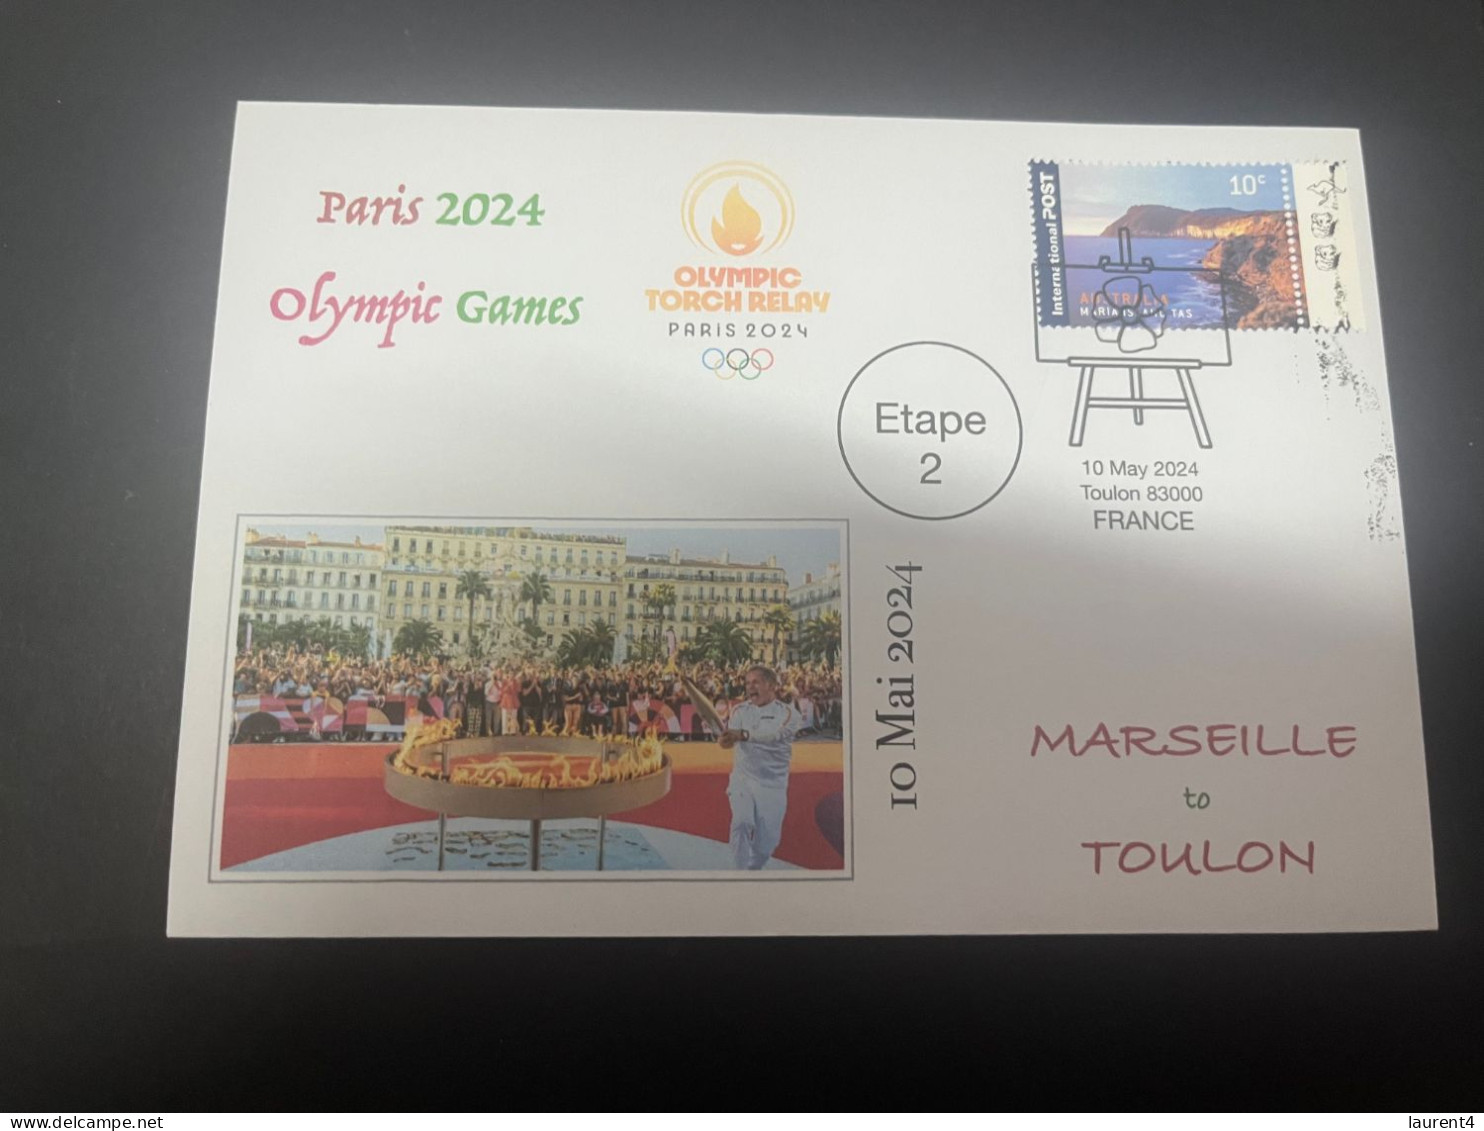 11-5-2024 (4 Z 42) Paris Olympic Games 2024 - Torch Relay (Etape 2) In Toulon (10-5-2024) With OZ Stamp - Verano 2024 : París